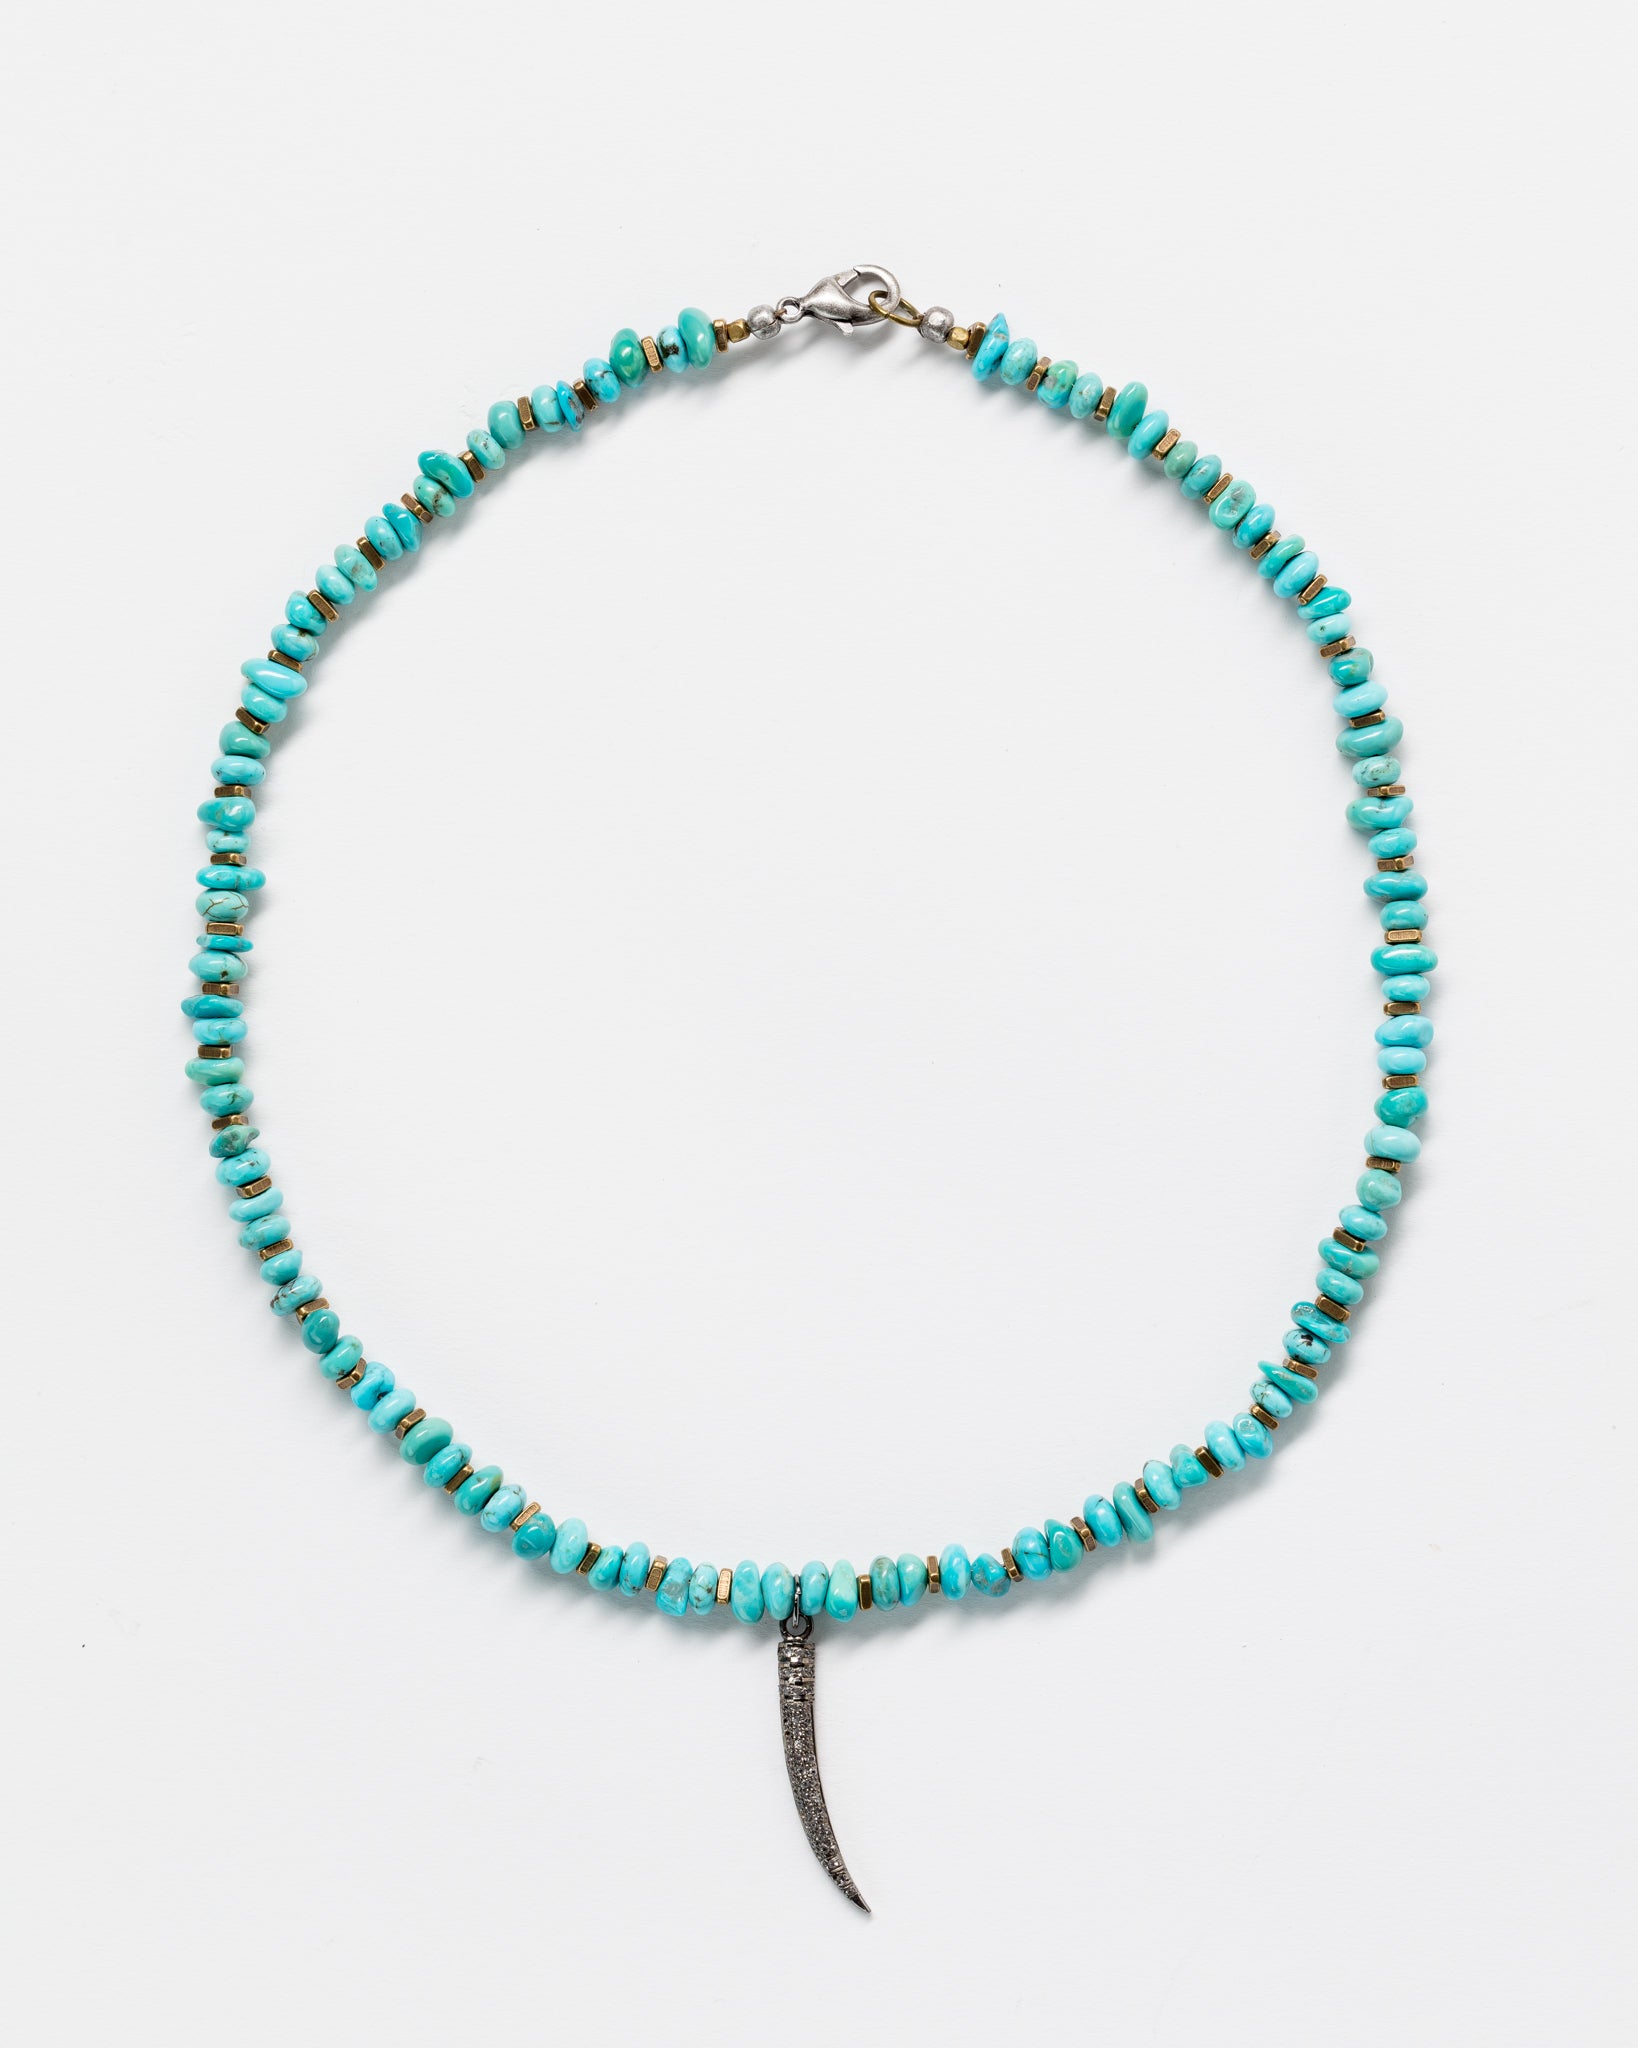 A necklace featuring a sequence of vibrant Designs By Raya turquoise beads with a metallic silver clasp, complemented by a slender, curved pendant resembling a horn or tusk, against a plain white background.